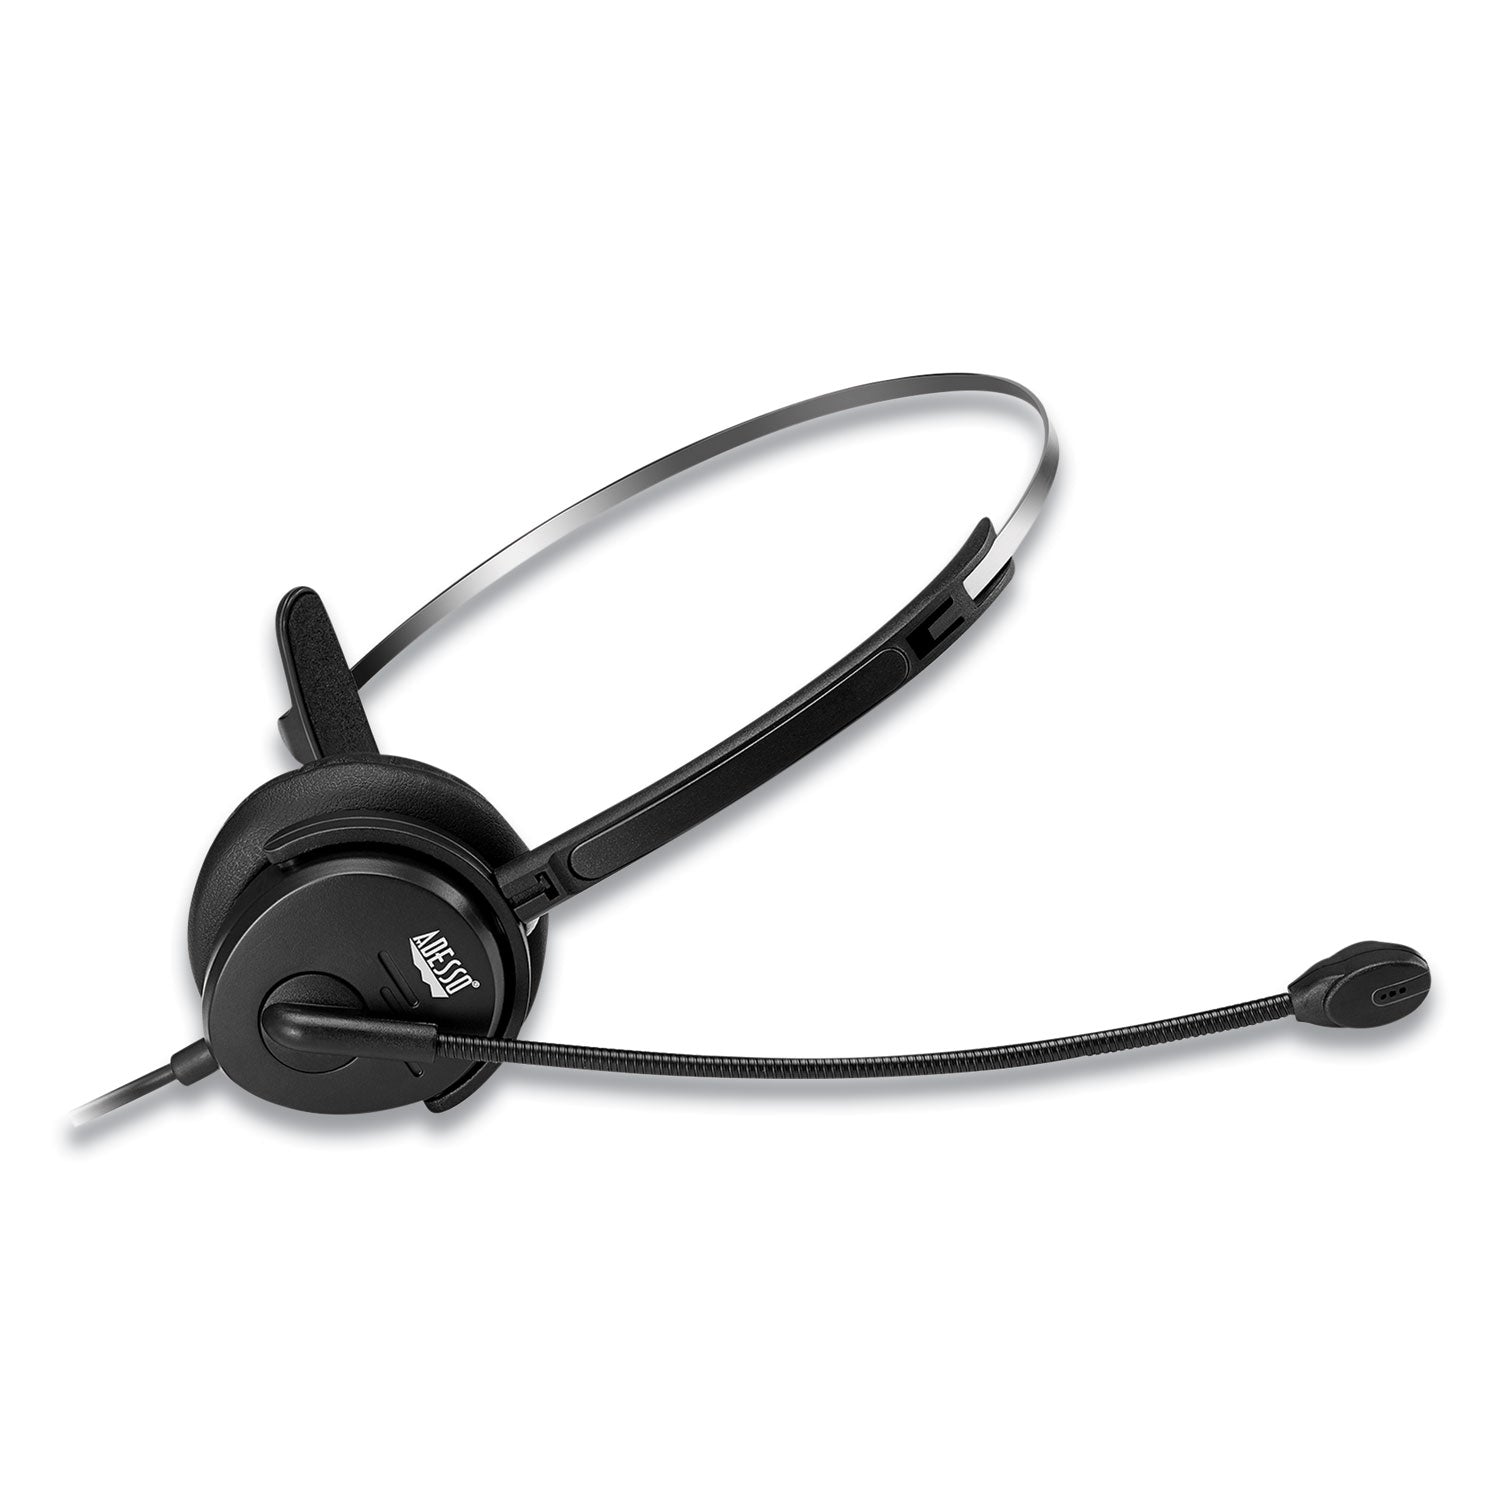 xtream-p1-monaural-over-the-head-headset-with-microphone-black_adextreamp1 - 2